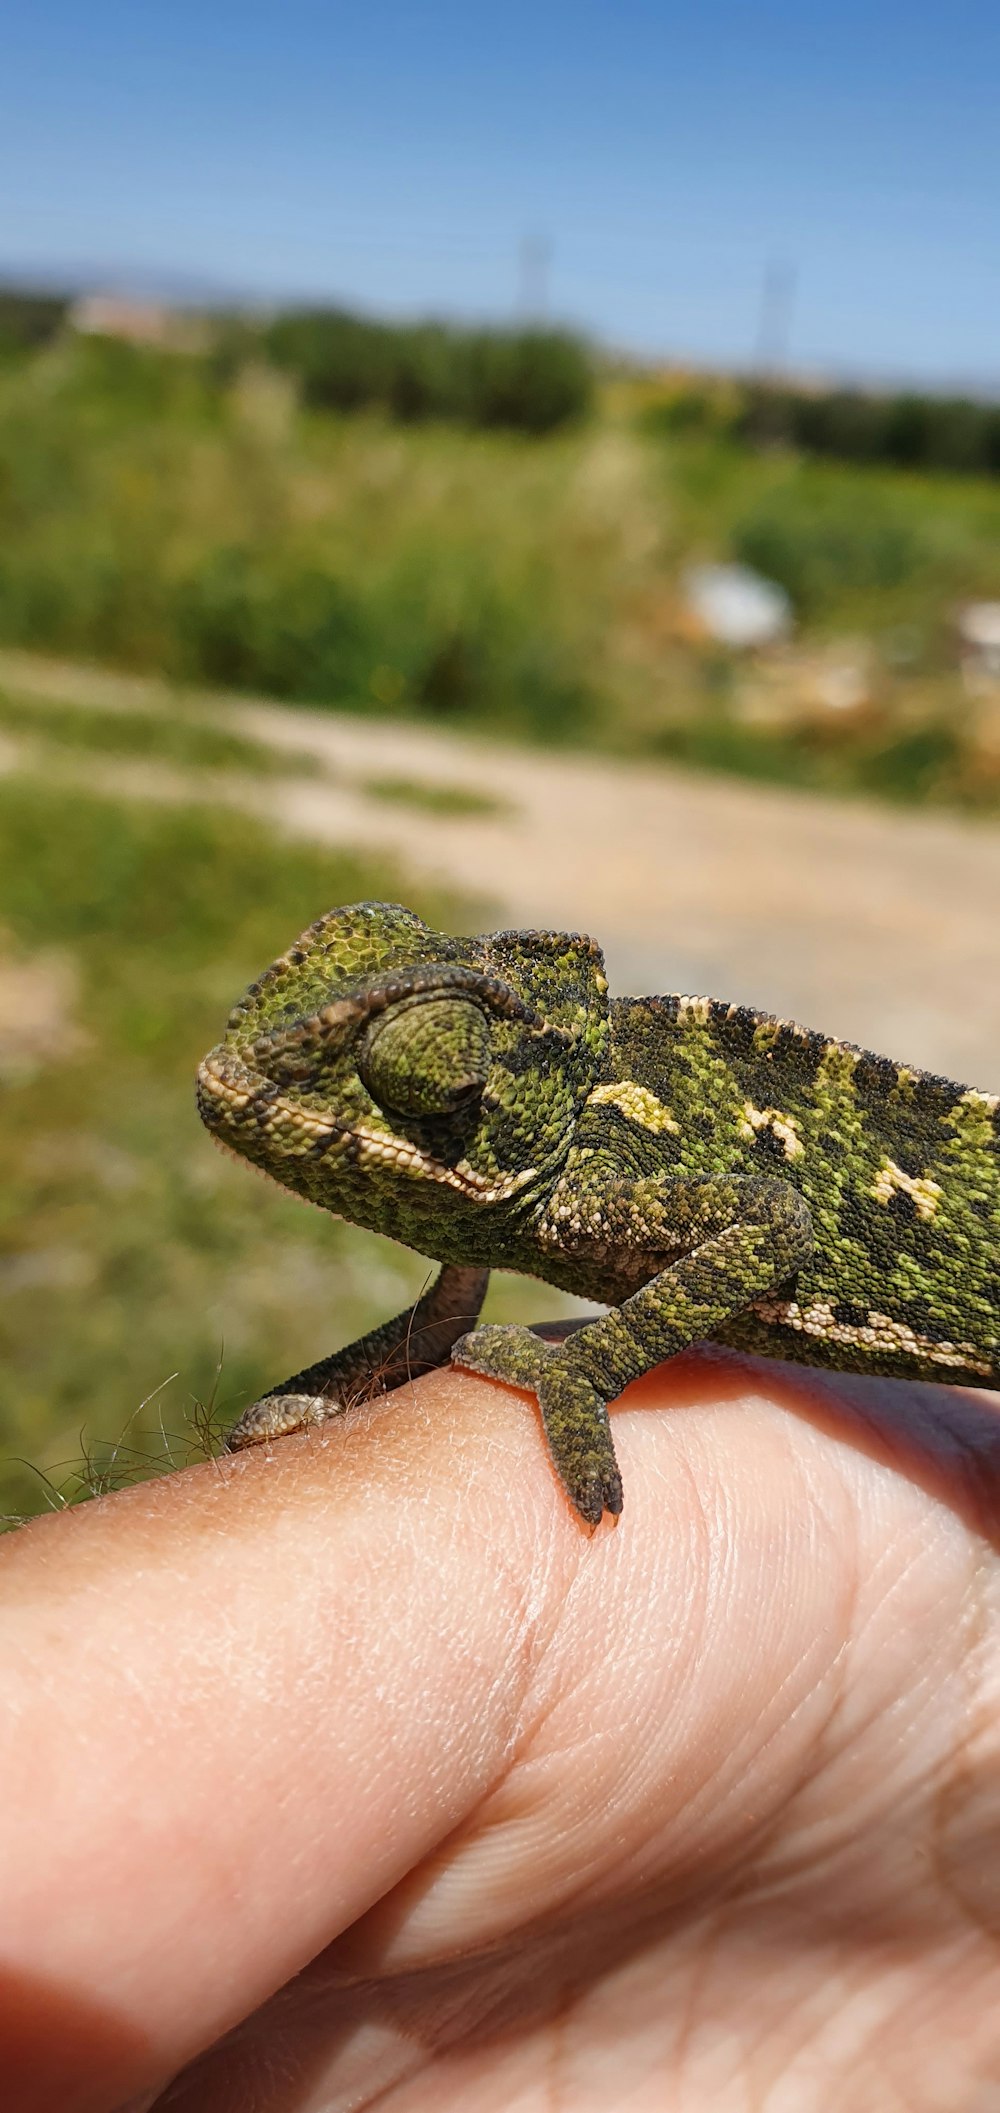 person holding green and black chameleon